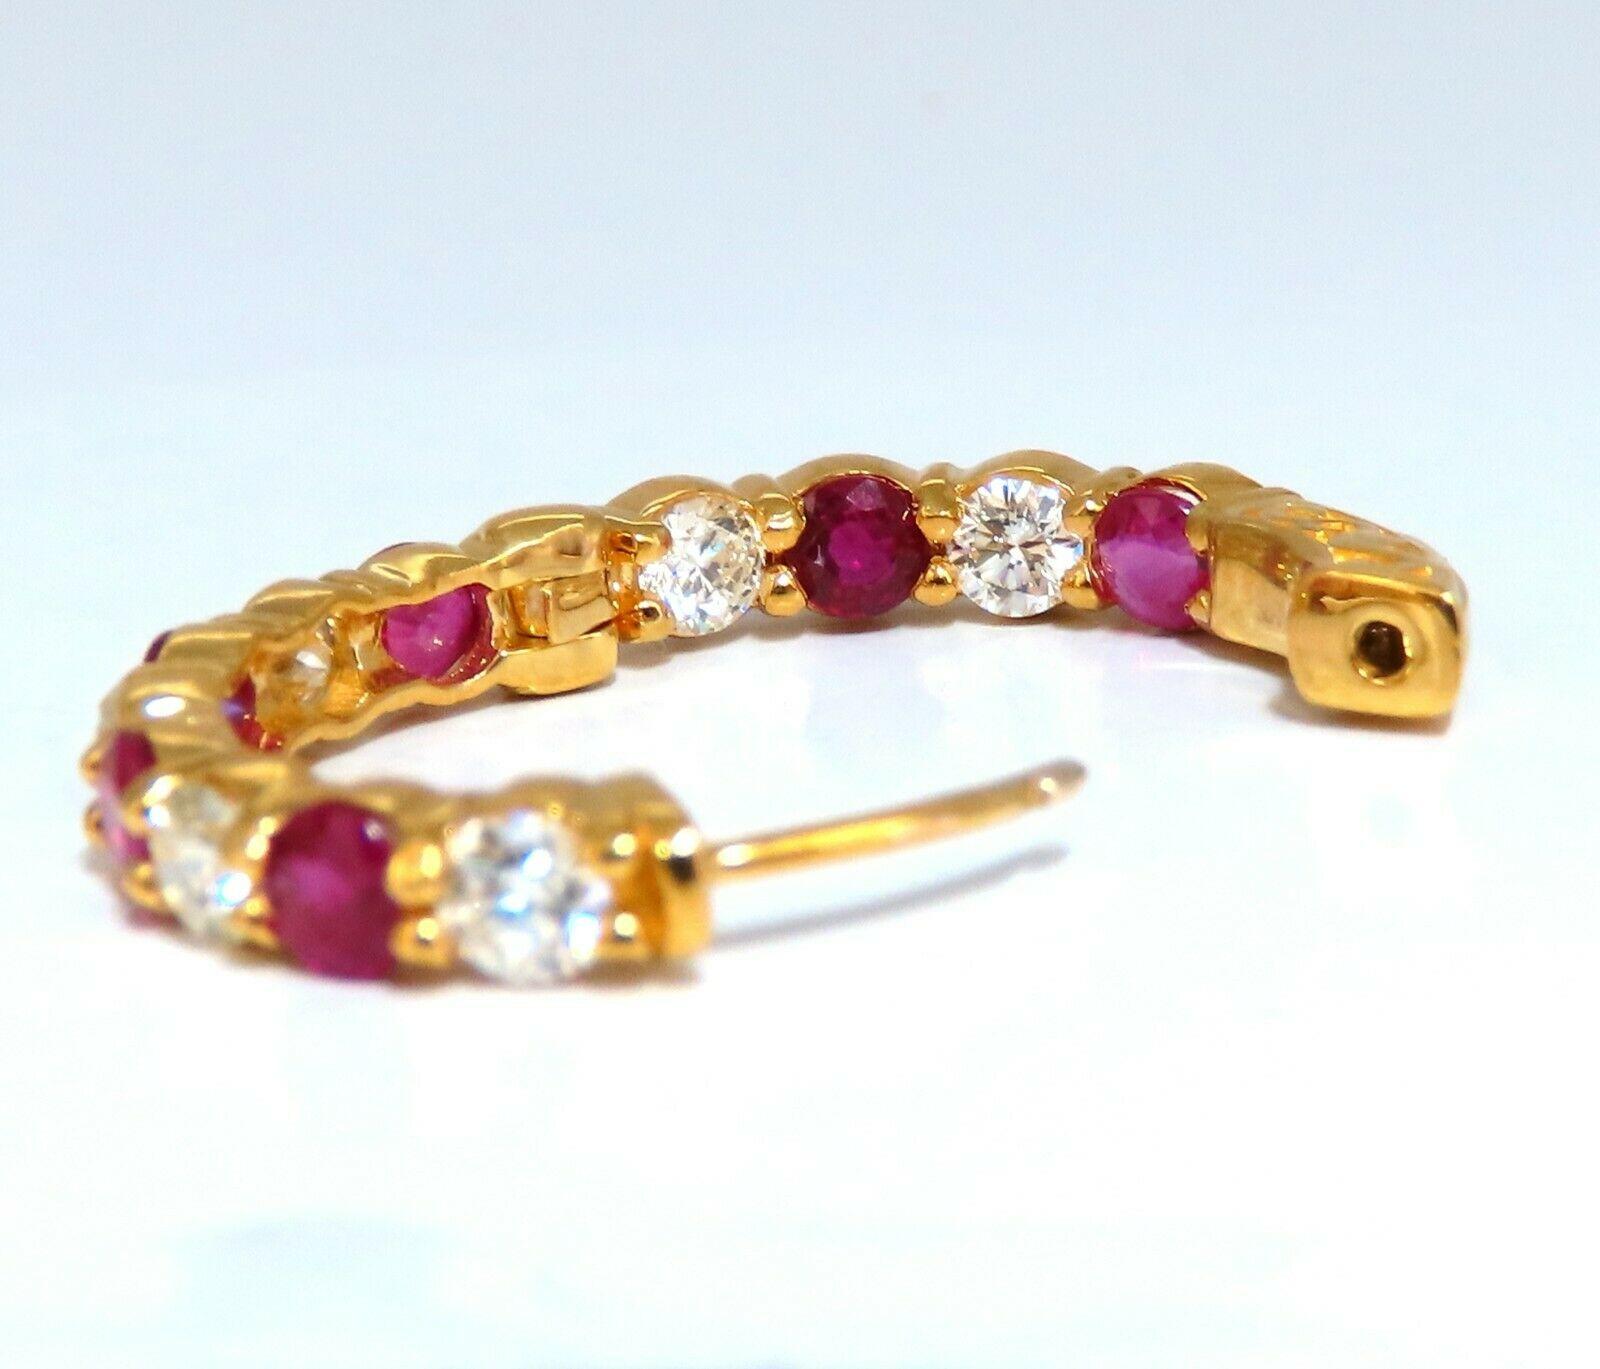 4.14ct Natural Ruby Diamonds Hoop Earrings 14kt Yellow Gold Inside Out For Sale 2